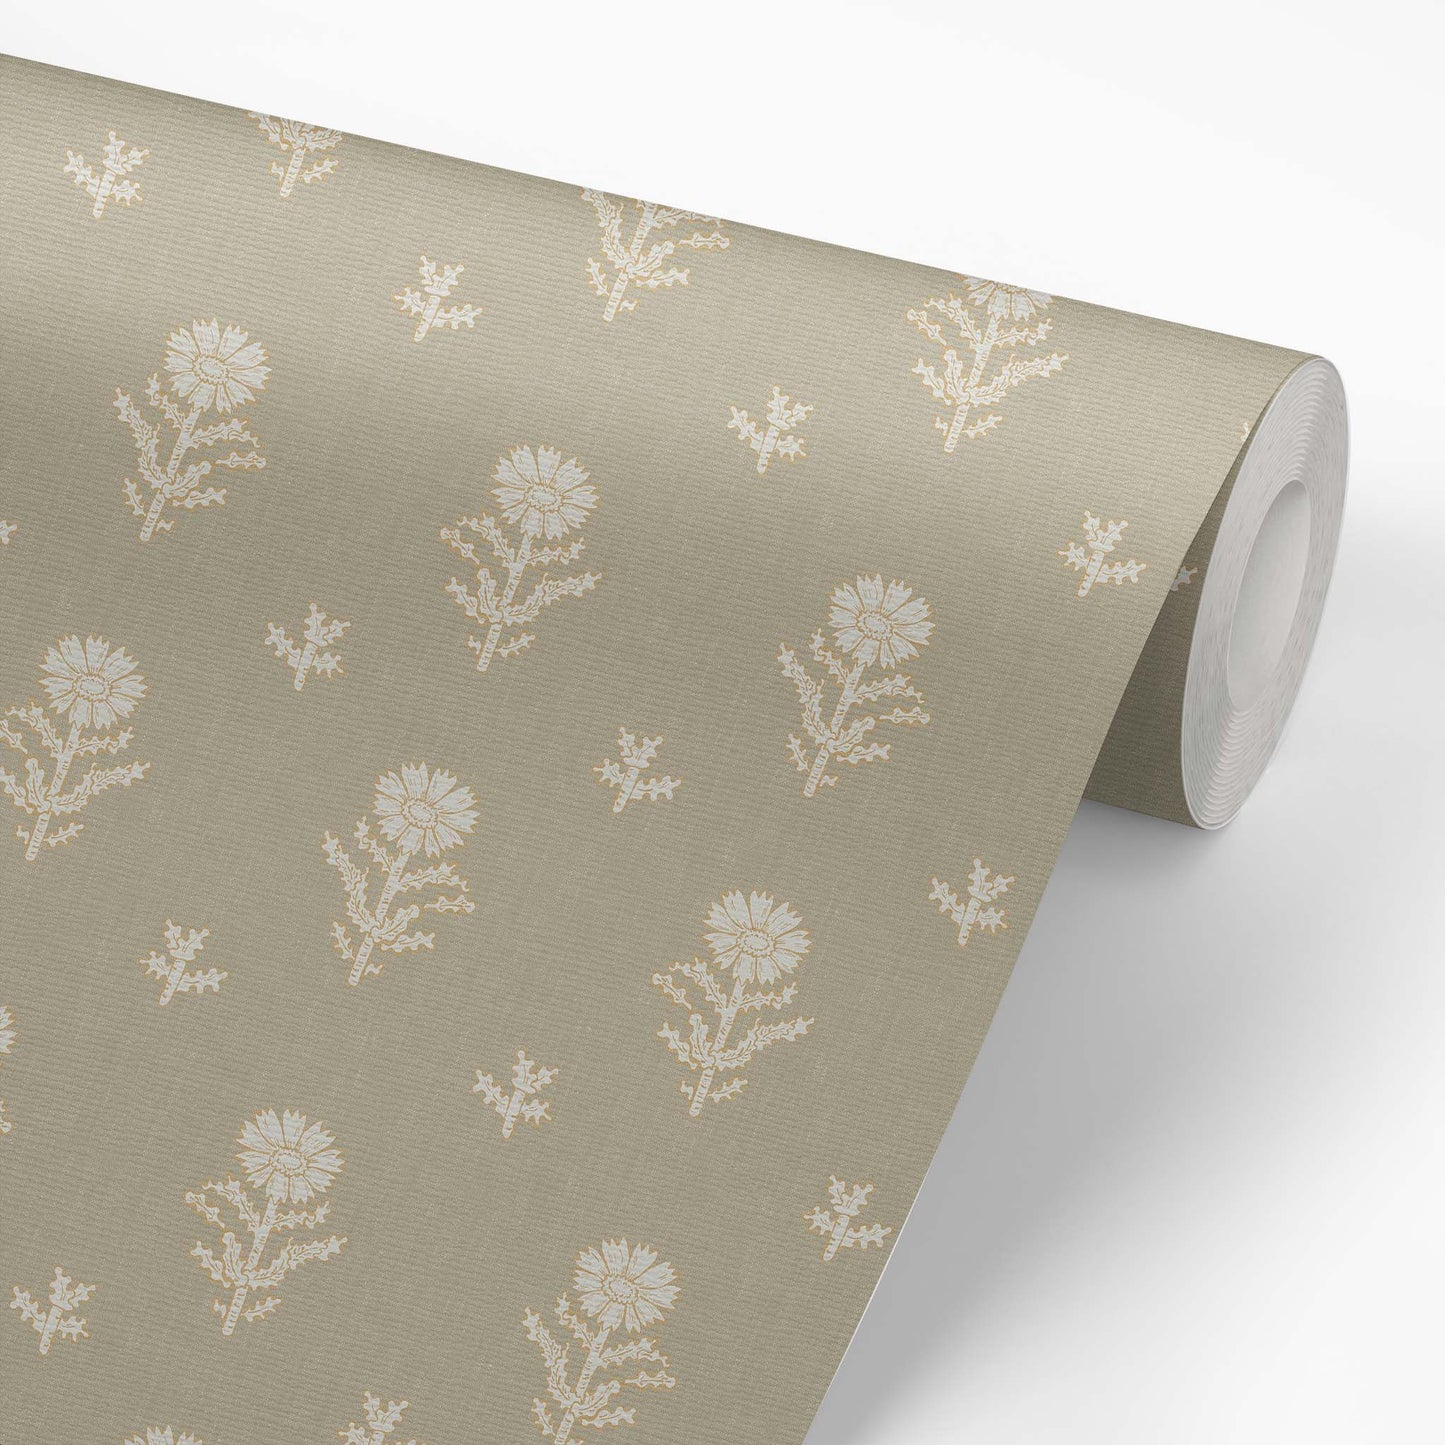 Add a touch of elegance and femininity to any room with our Small Vintage Floral Wallpaper in Sage. Drawing from classic vintage designs, this wallpaper combines delicate florals with soft, subtle tones to create an ambience of comfort and refinement.